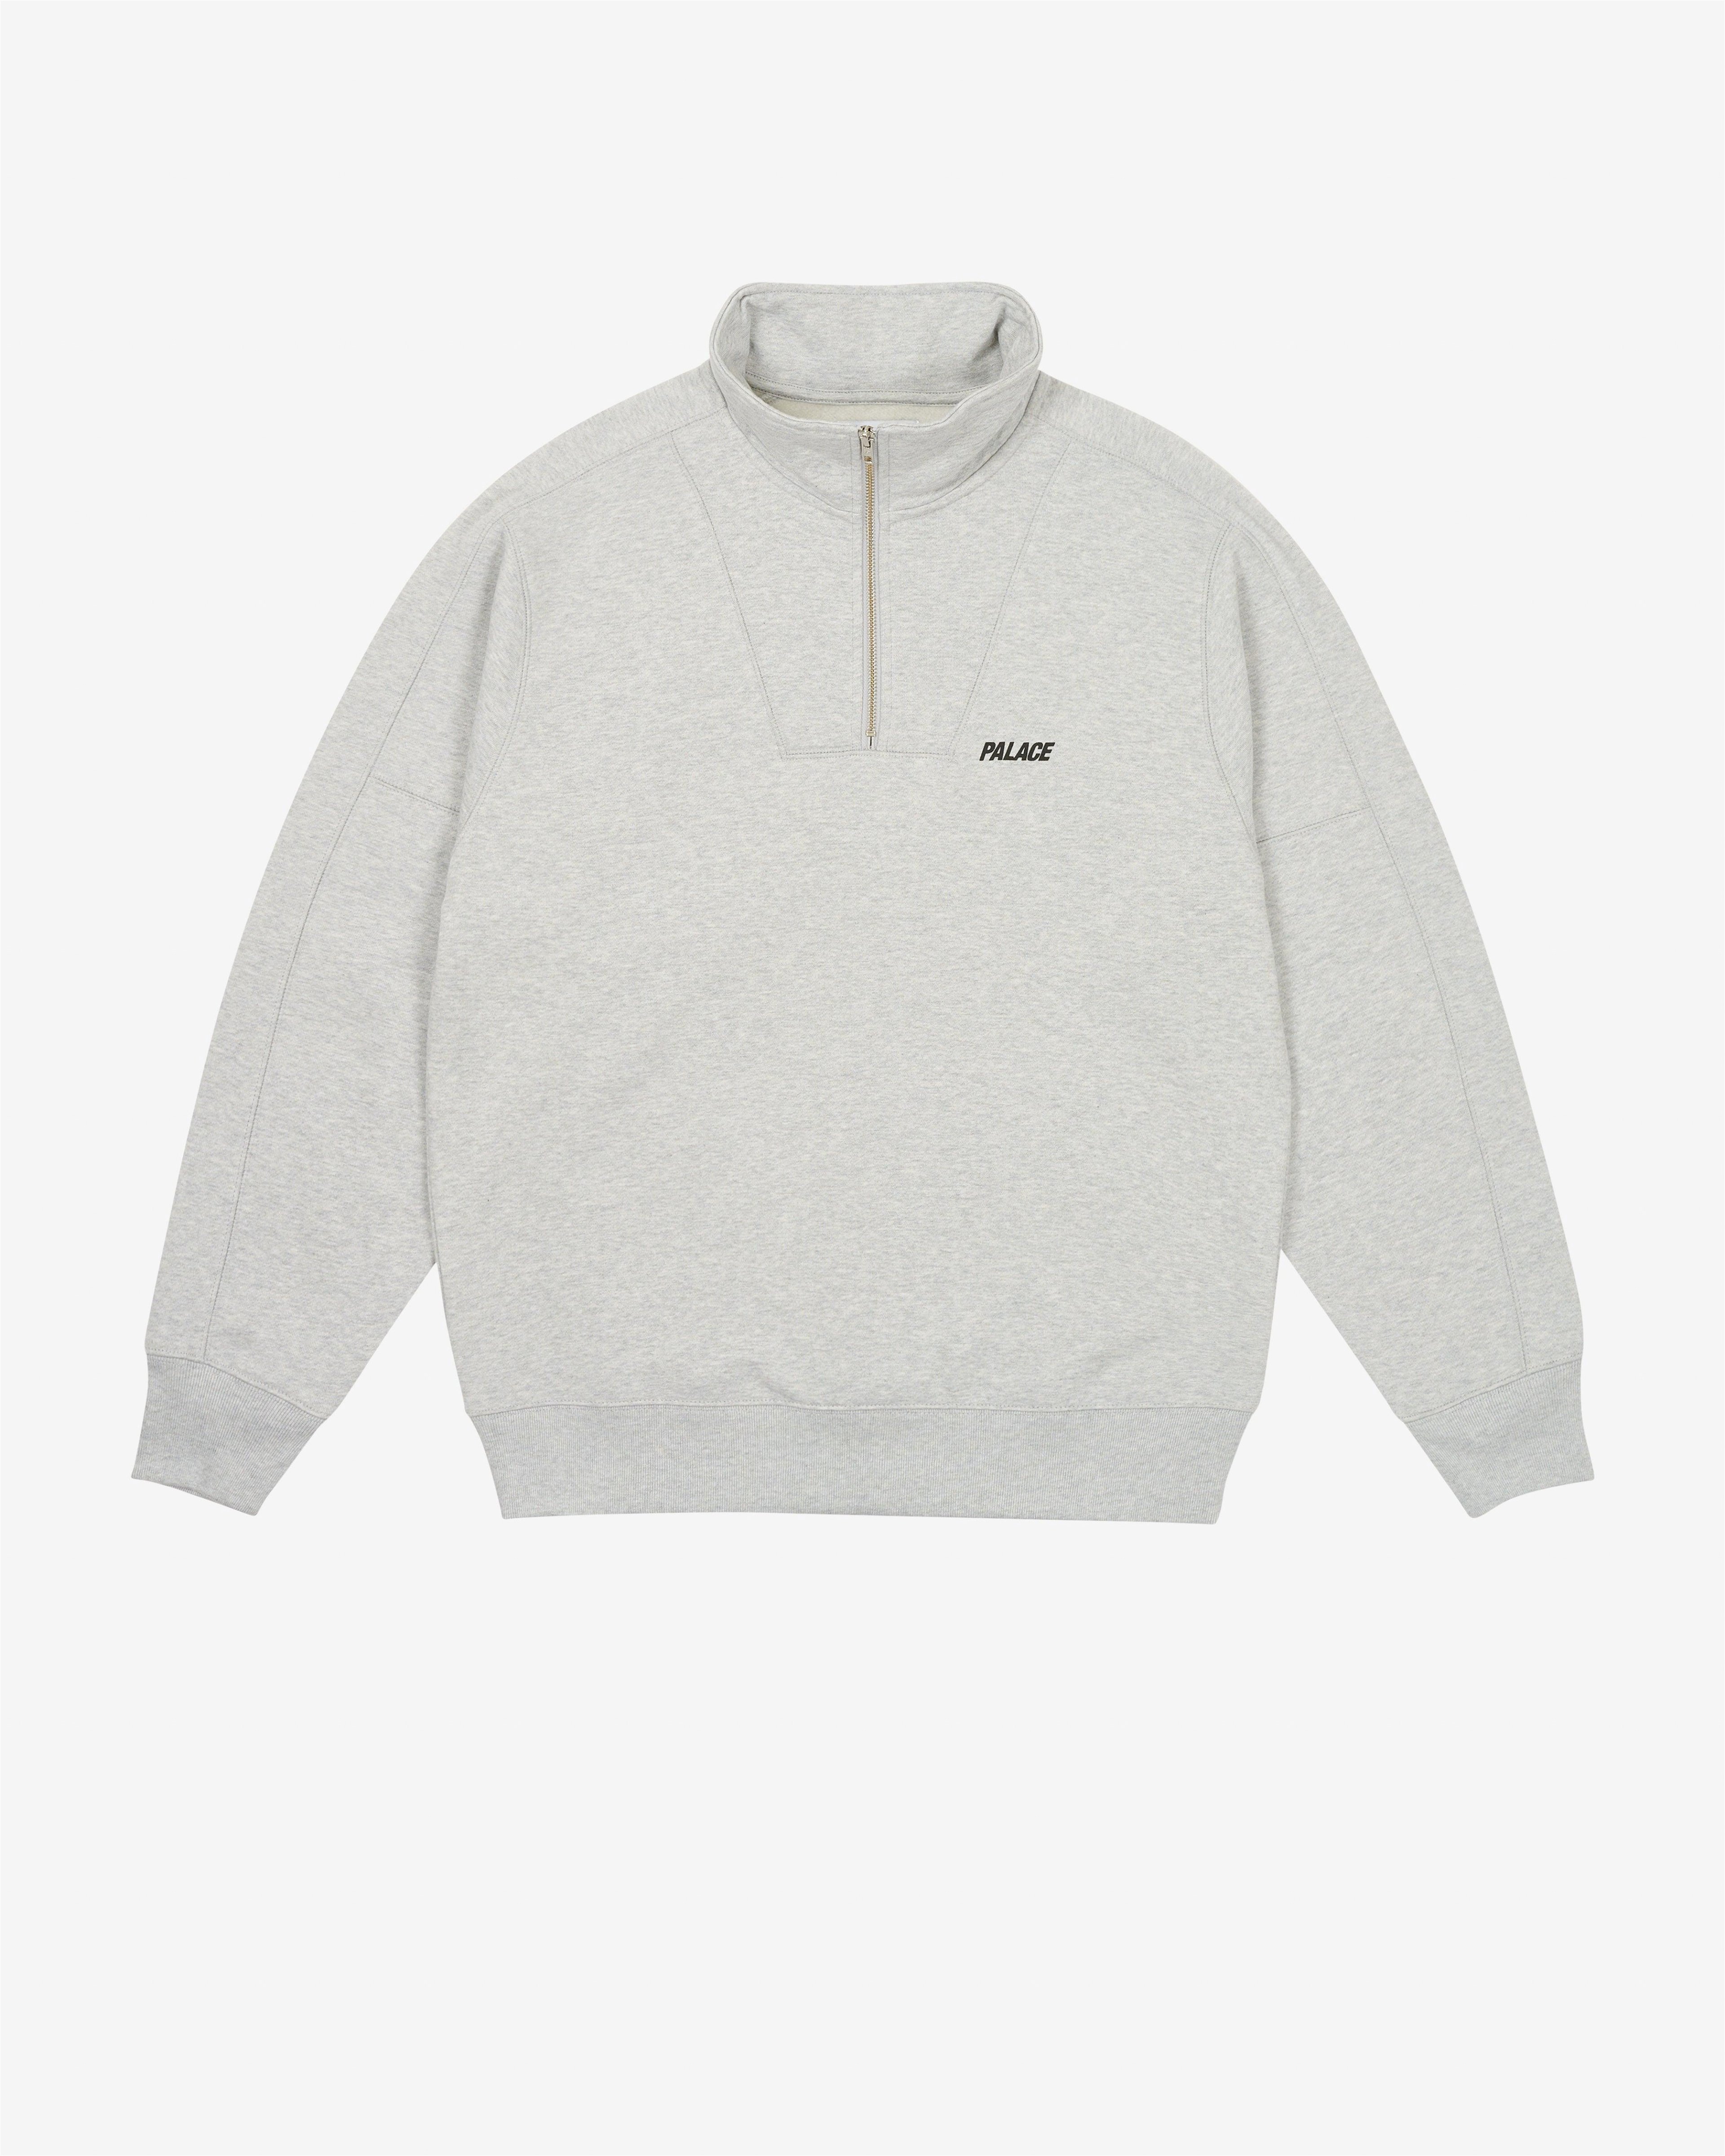 Palace - Men's P-Funnel - (Grey Marl) by PALACE